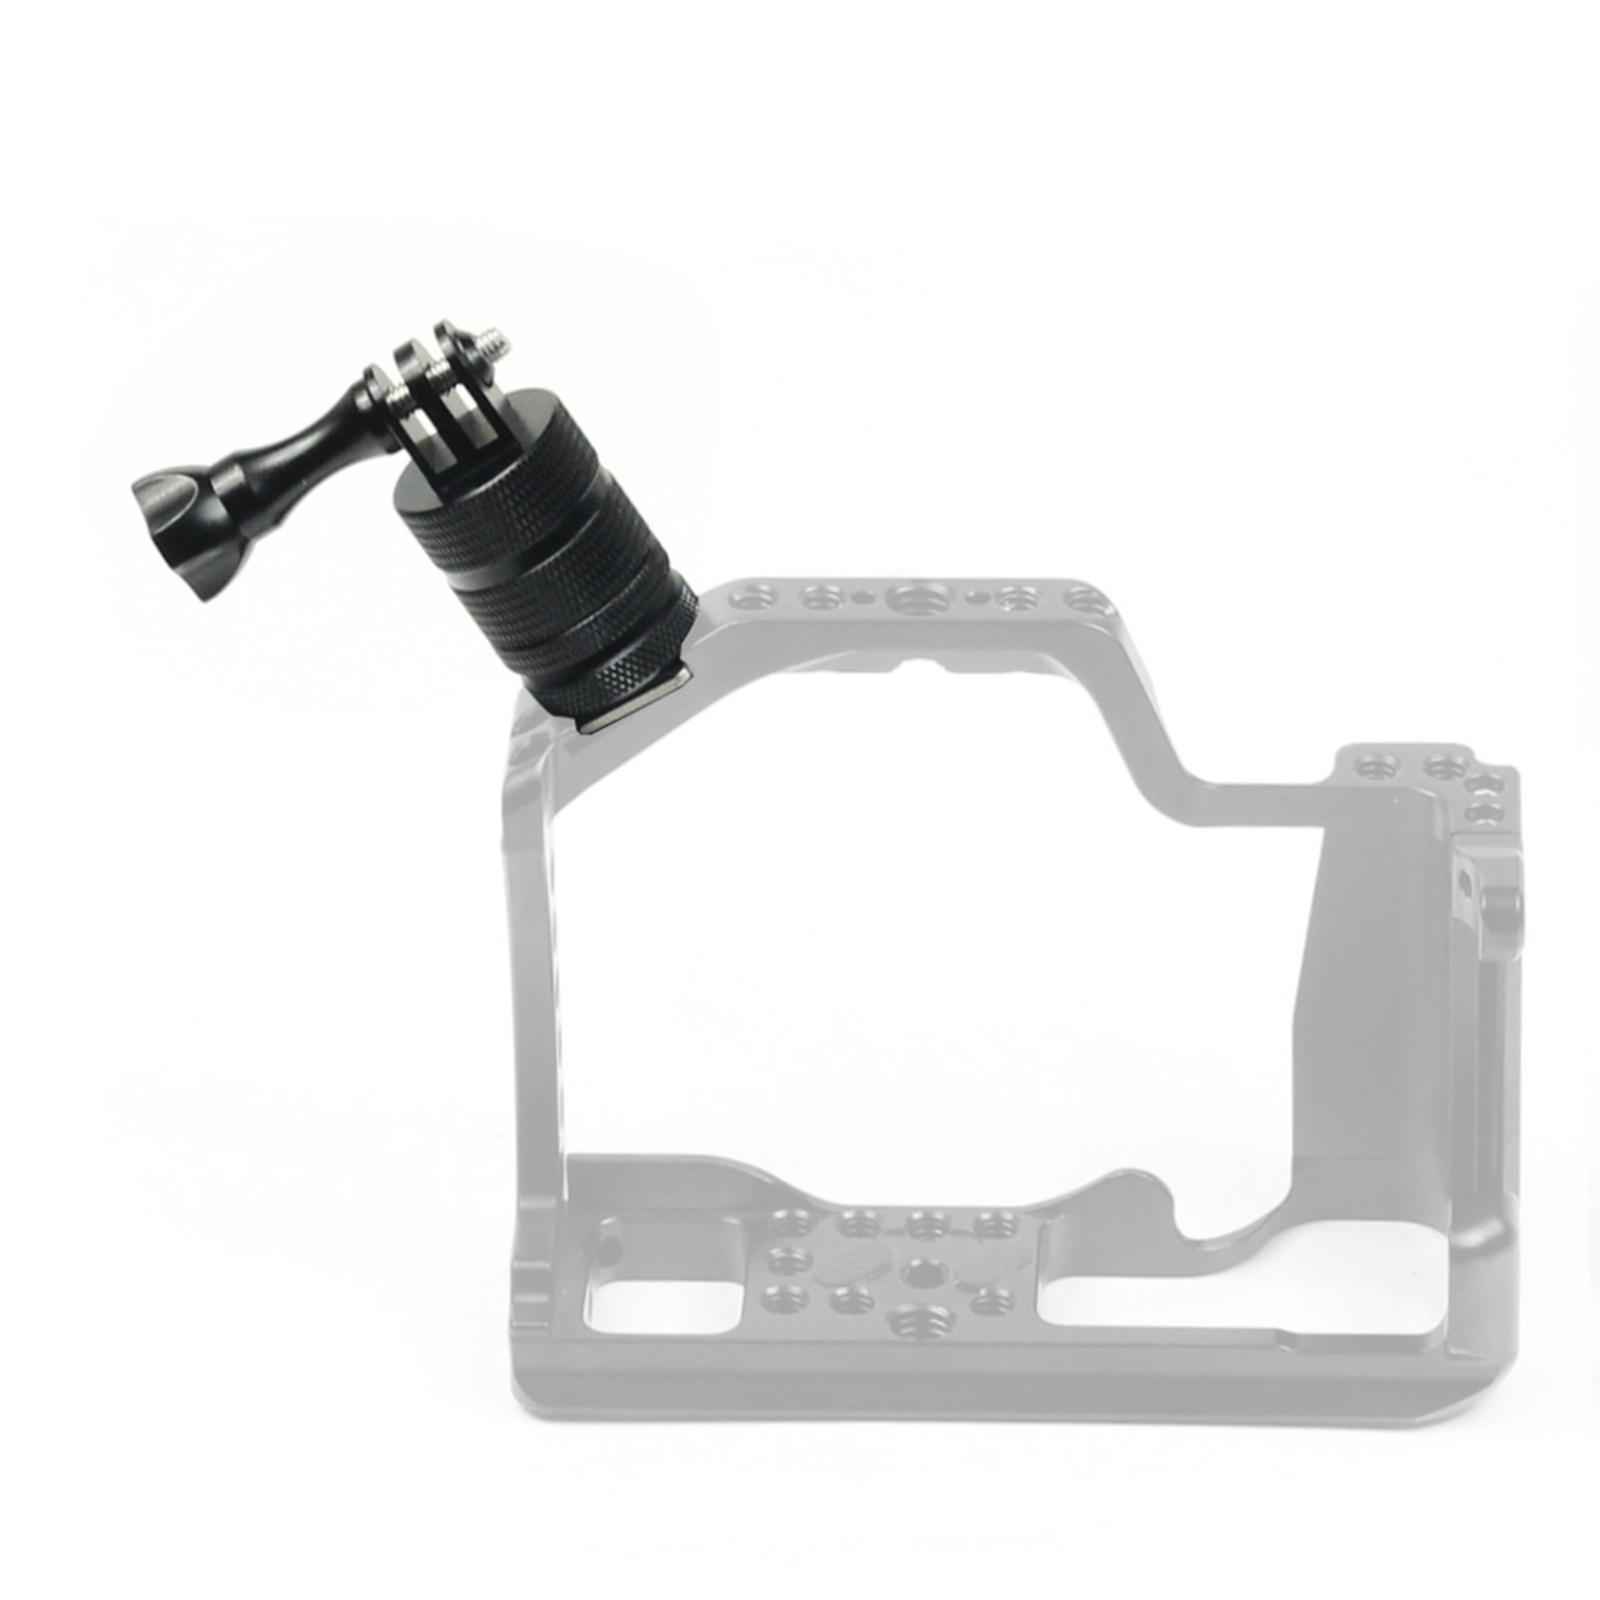 360 Degree Rotation Hot Shoe Mount Adapter Camera Mount for Action Cameras